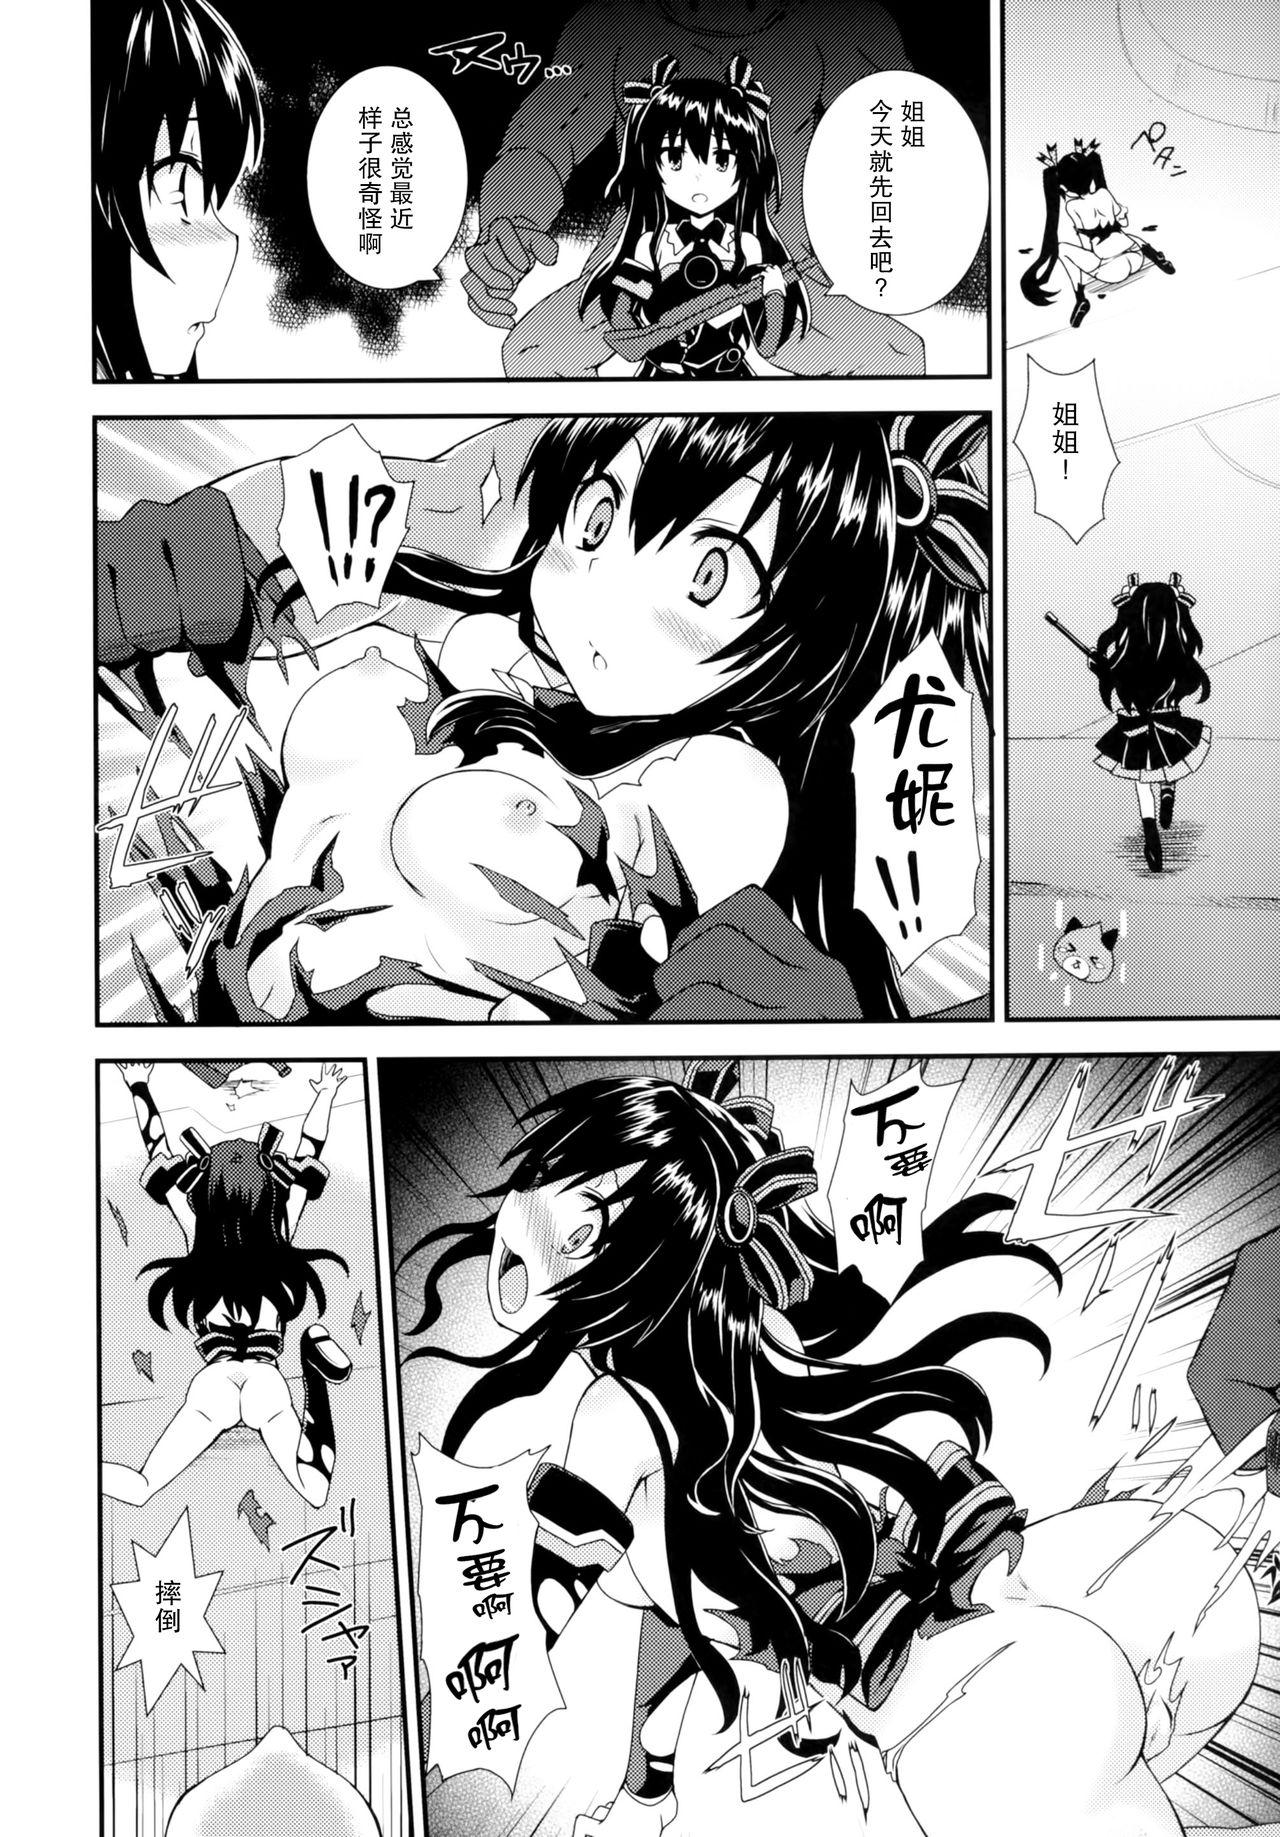 Tinytits Inyoku no Sustain - Sustain of Lust - Hyperdimension neptunia Bigtits - Page 8